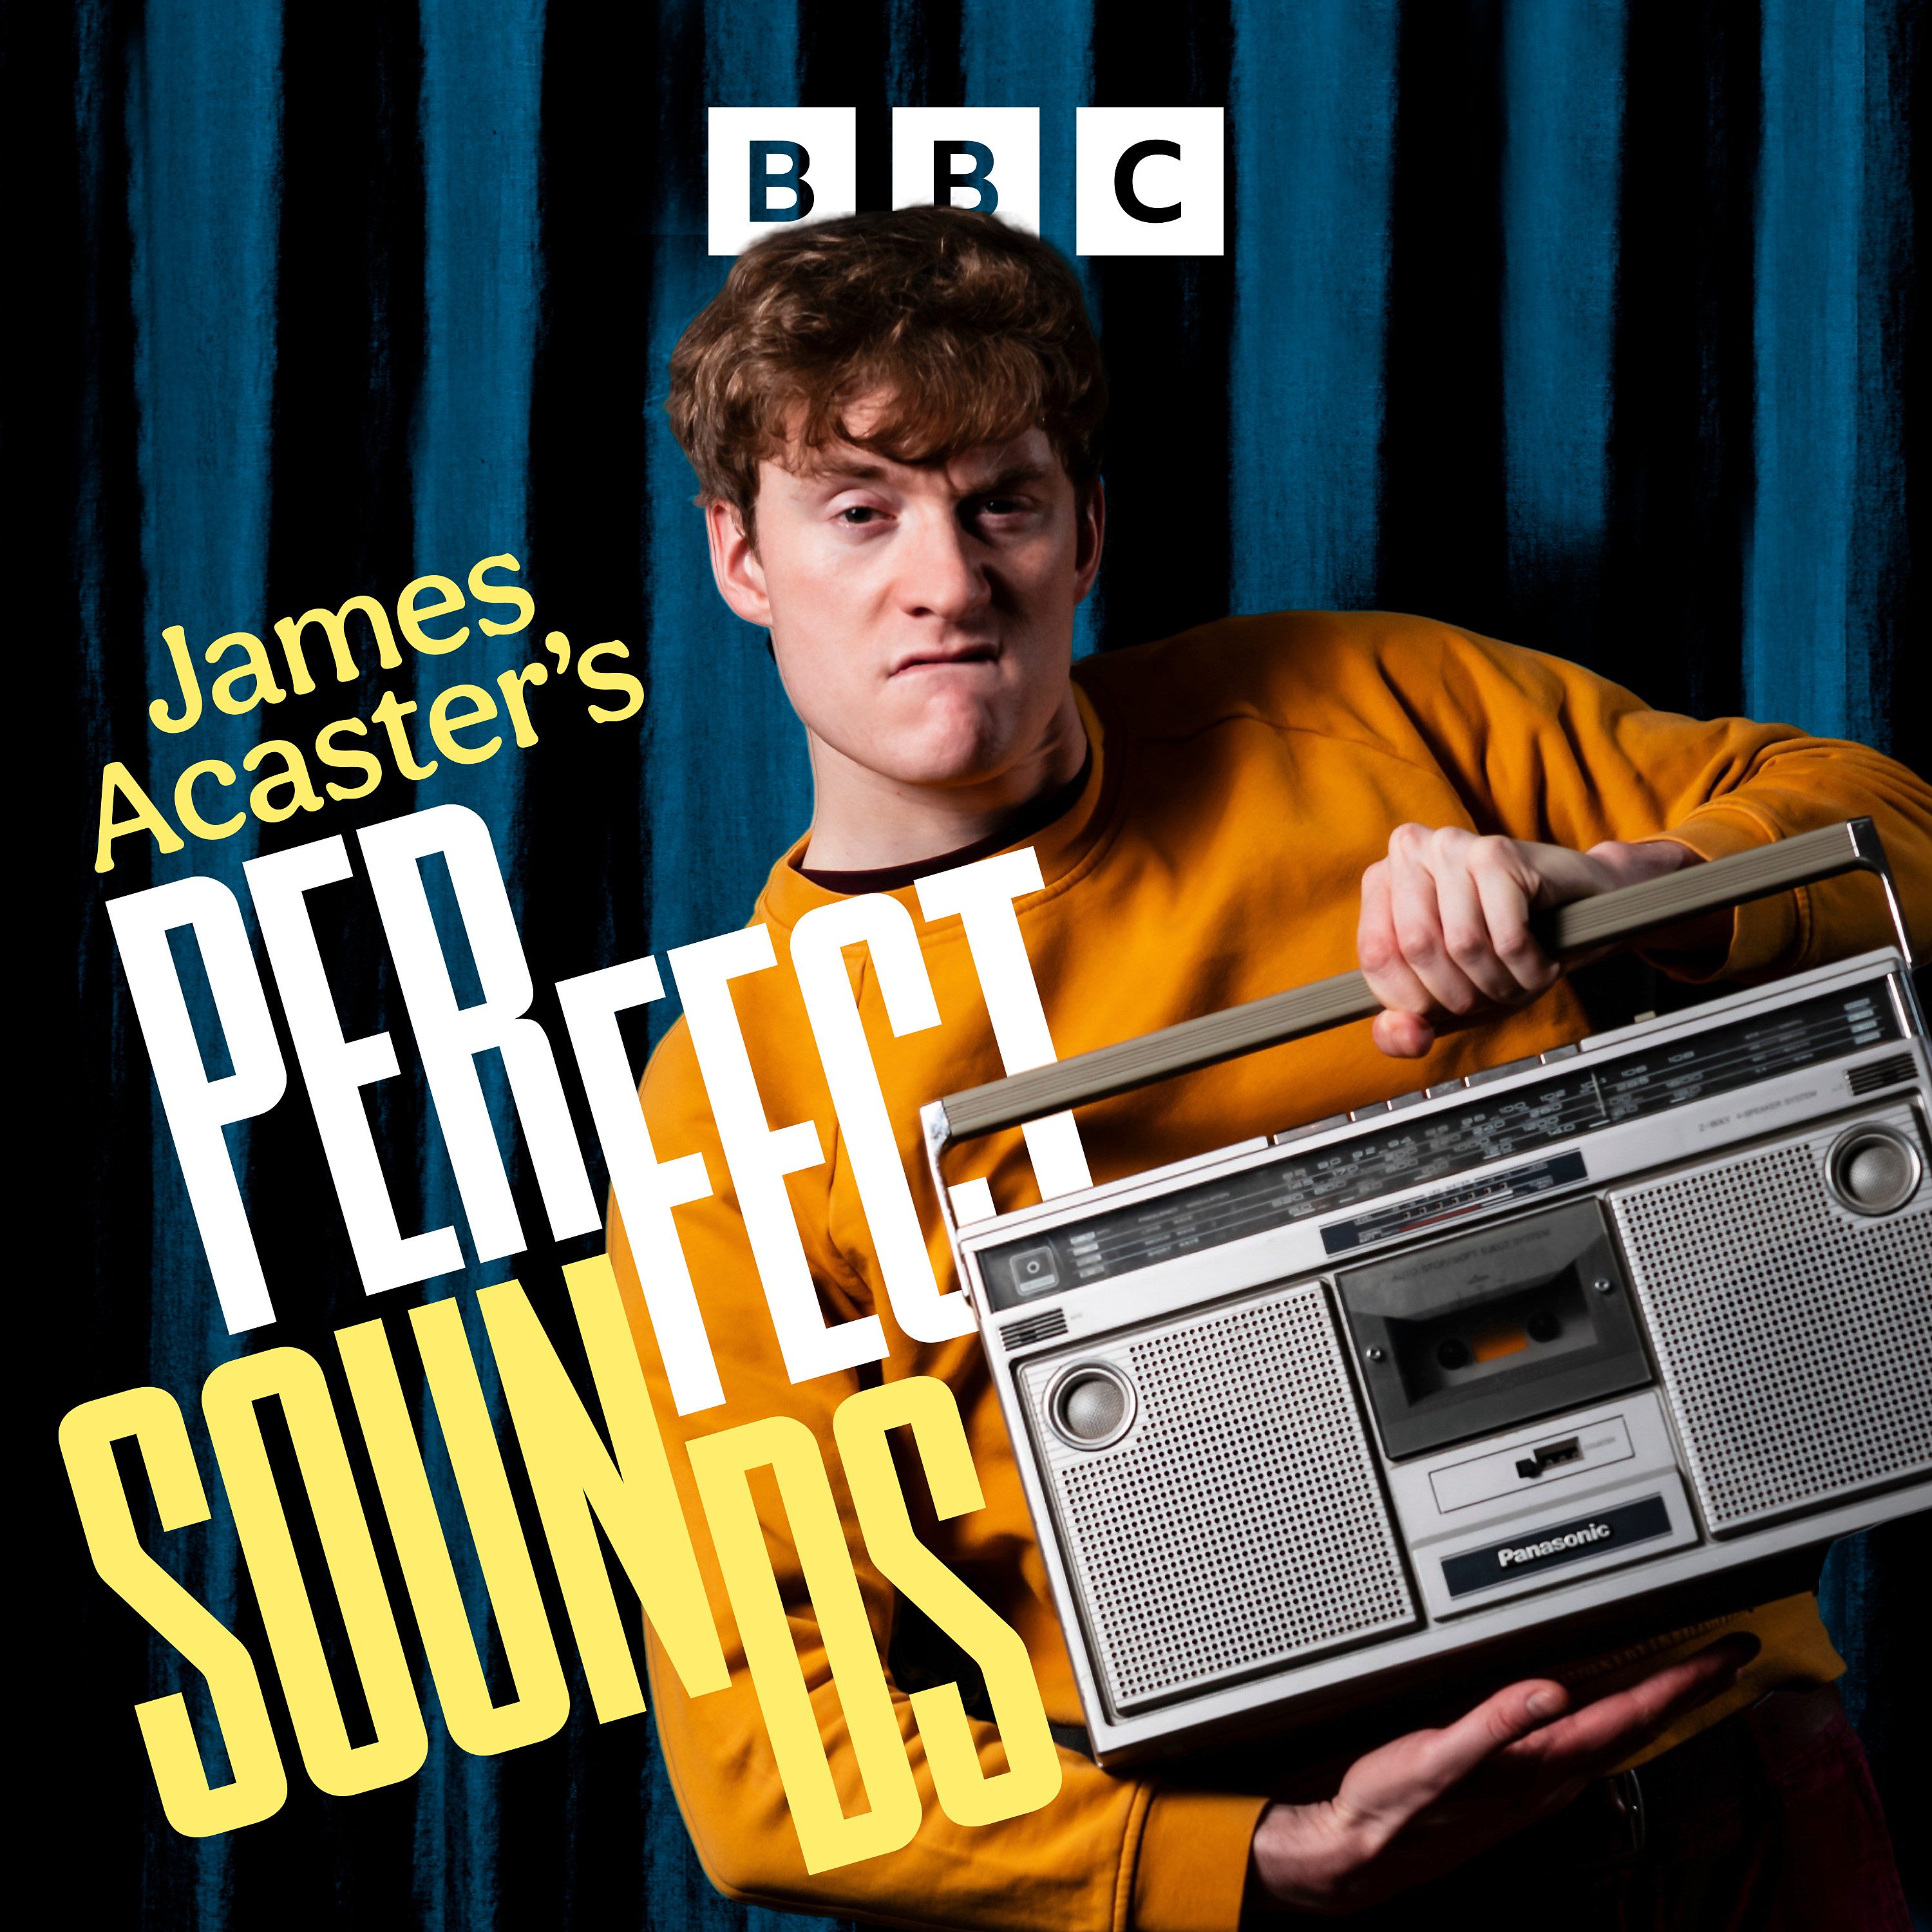 James Acaster's Perfect Sounds podcast